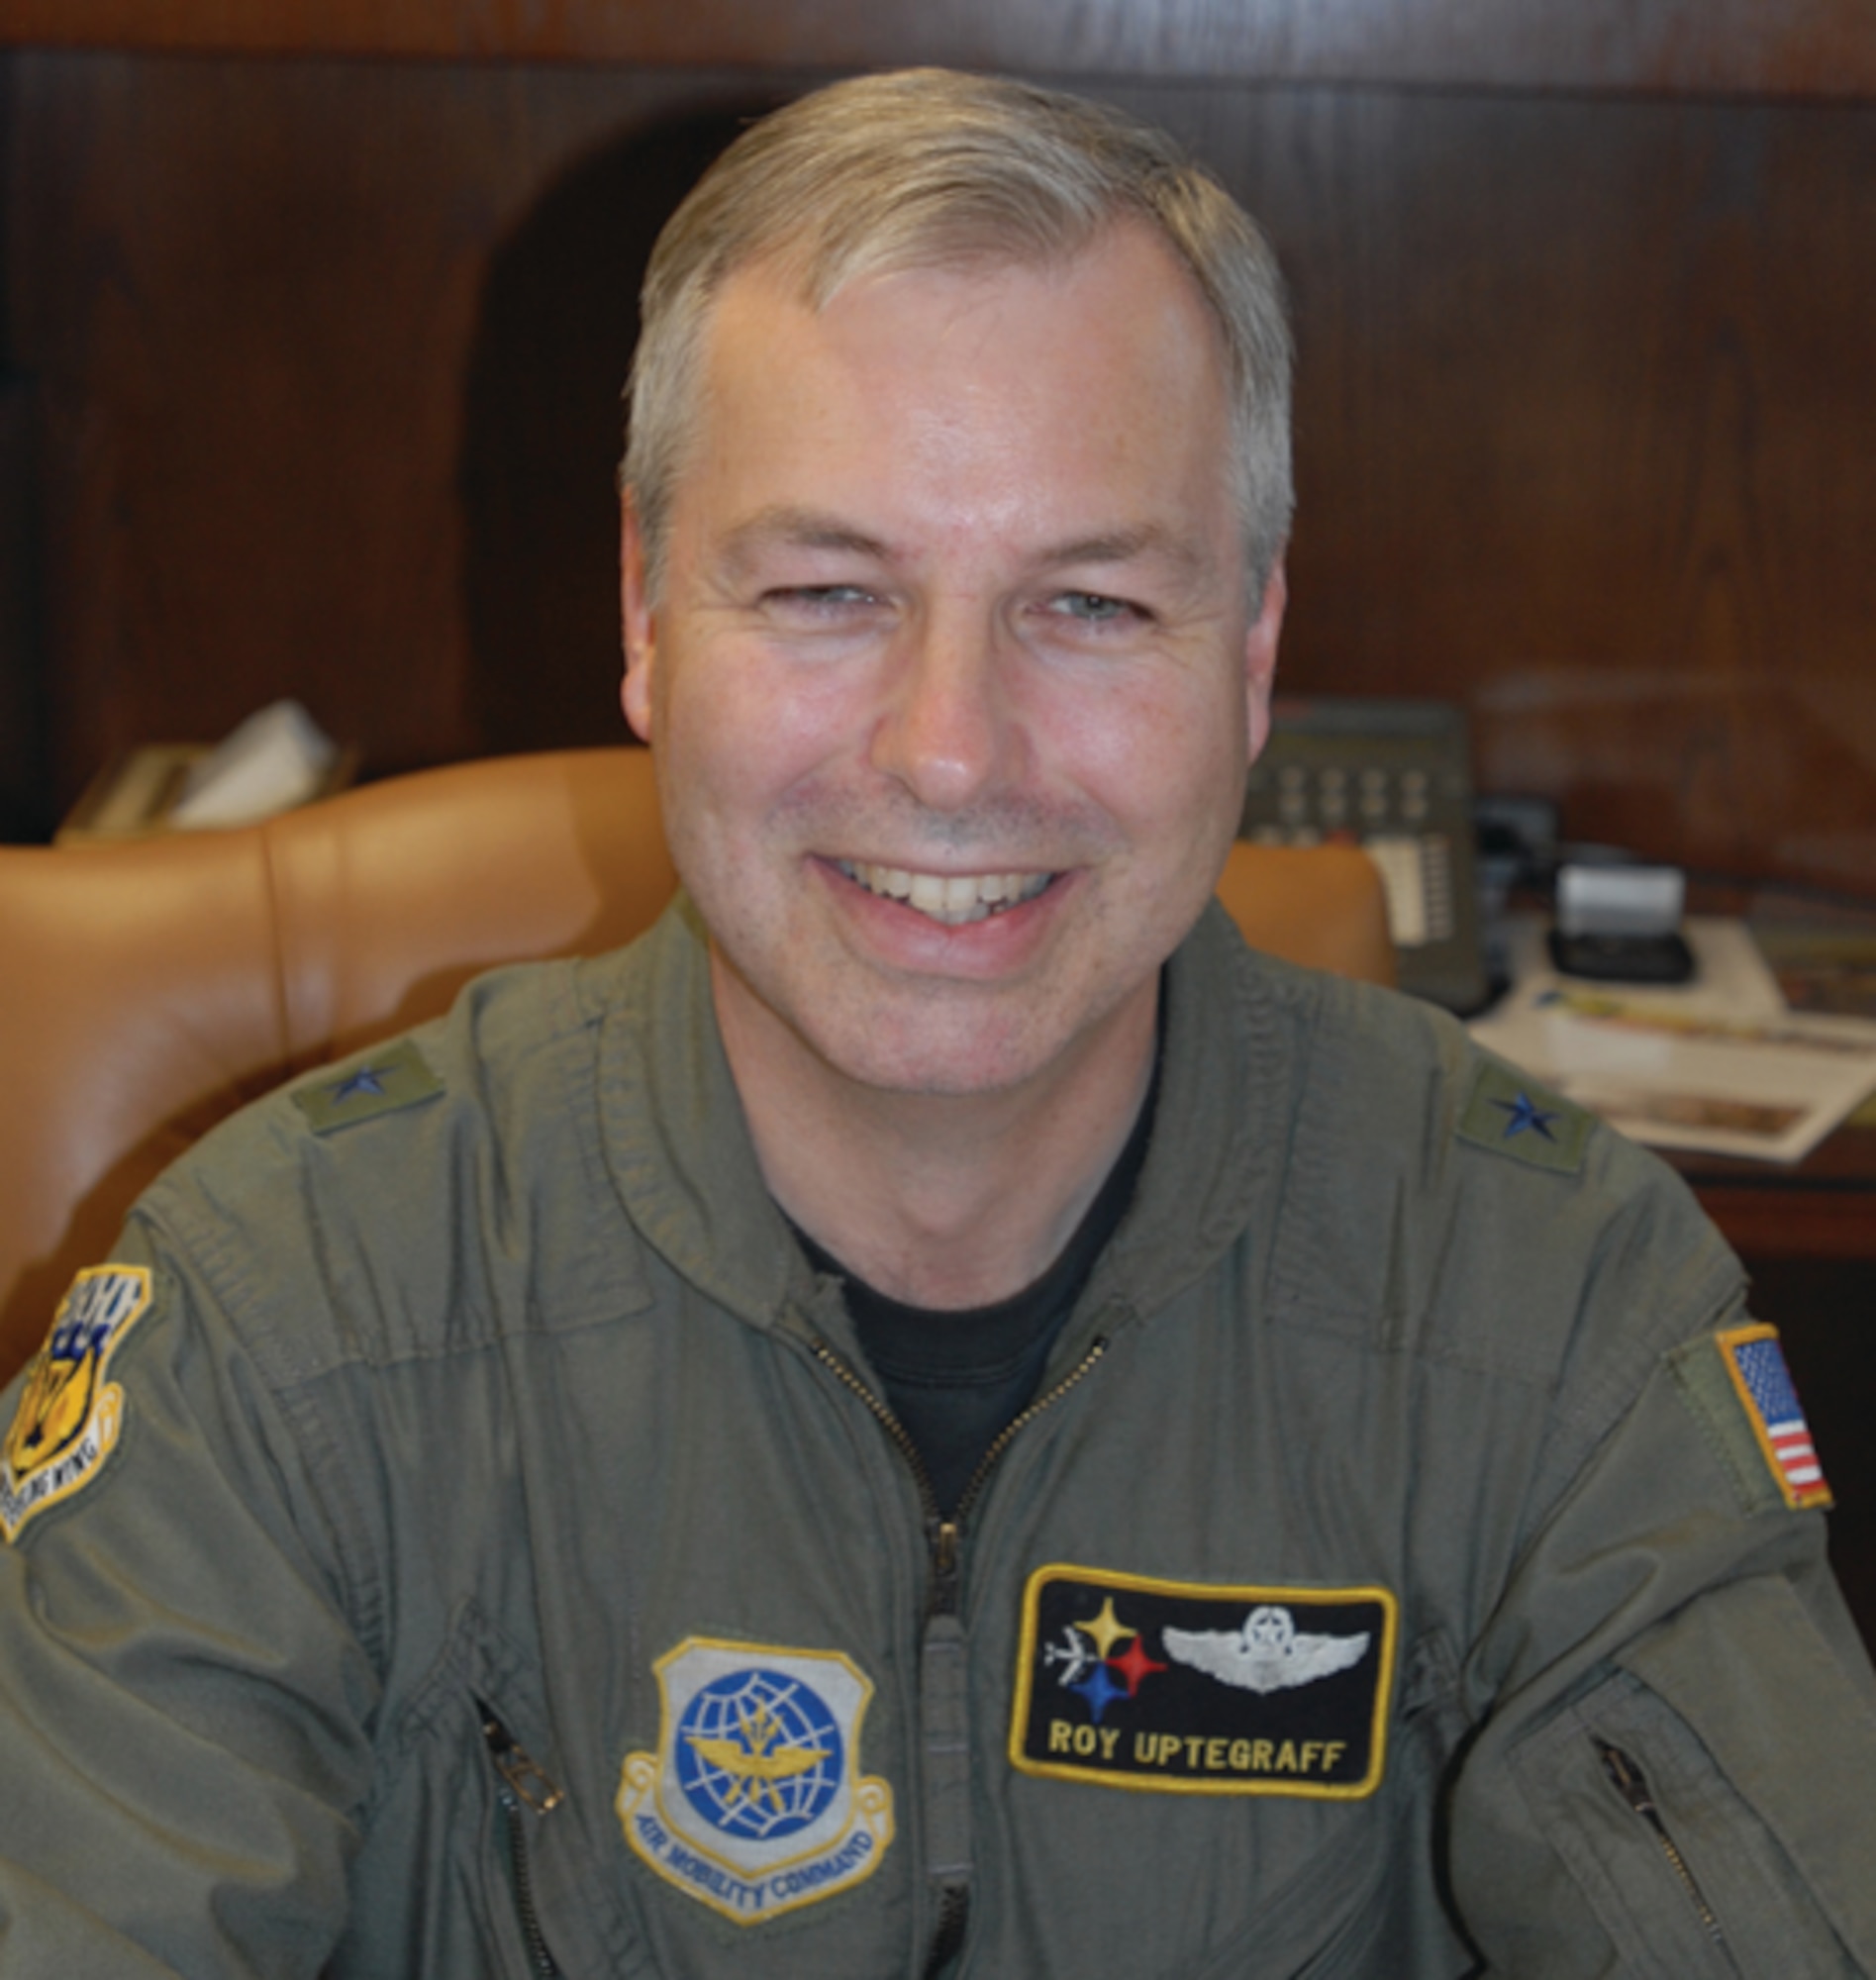 Brig. Gen. Uptegraff has served as the wing commander of the 171st Air Refueling Wing in Pittsburgh since October 2006. (U.S. Air Force Photo by Master Sgt. Ann Young)